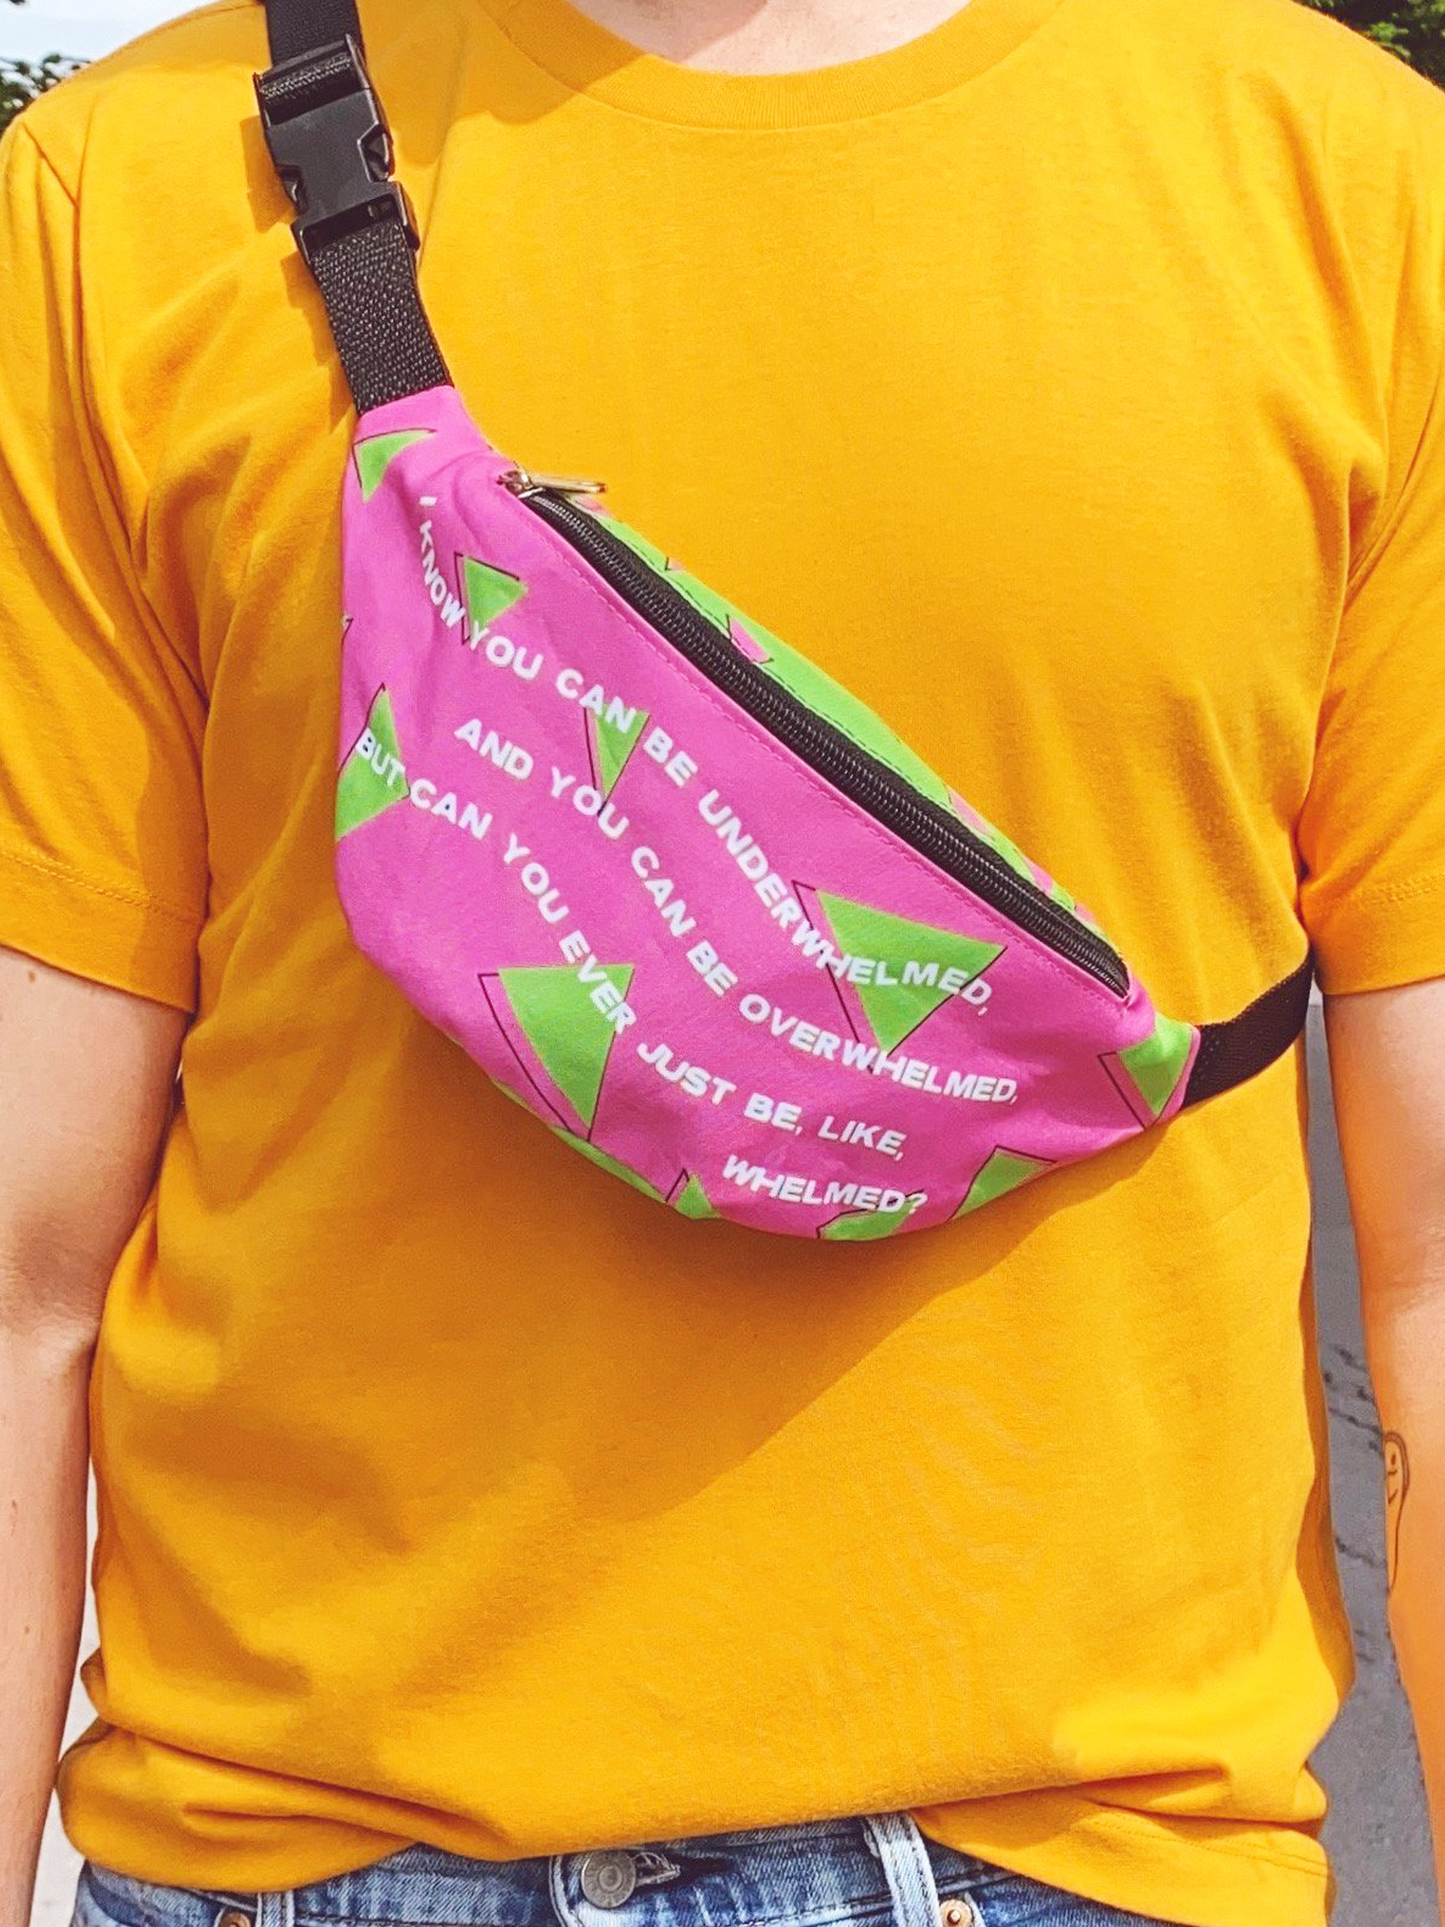 10 Things I Hate About You Belt Bag - Totally Good Time